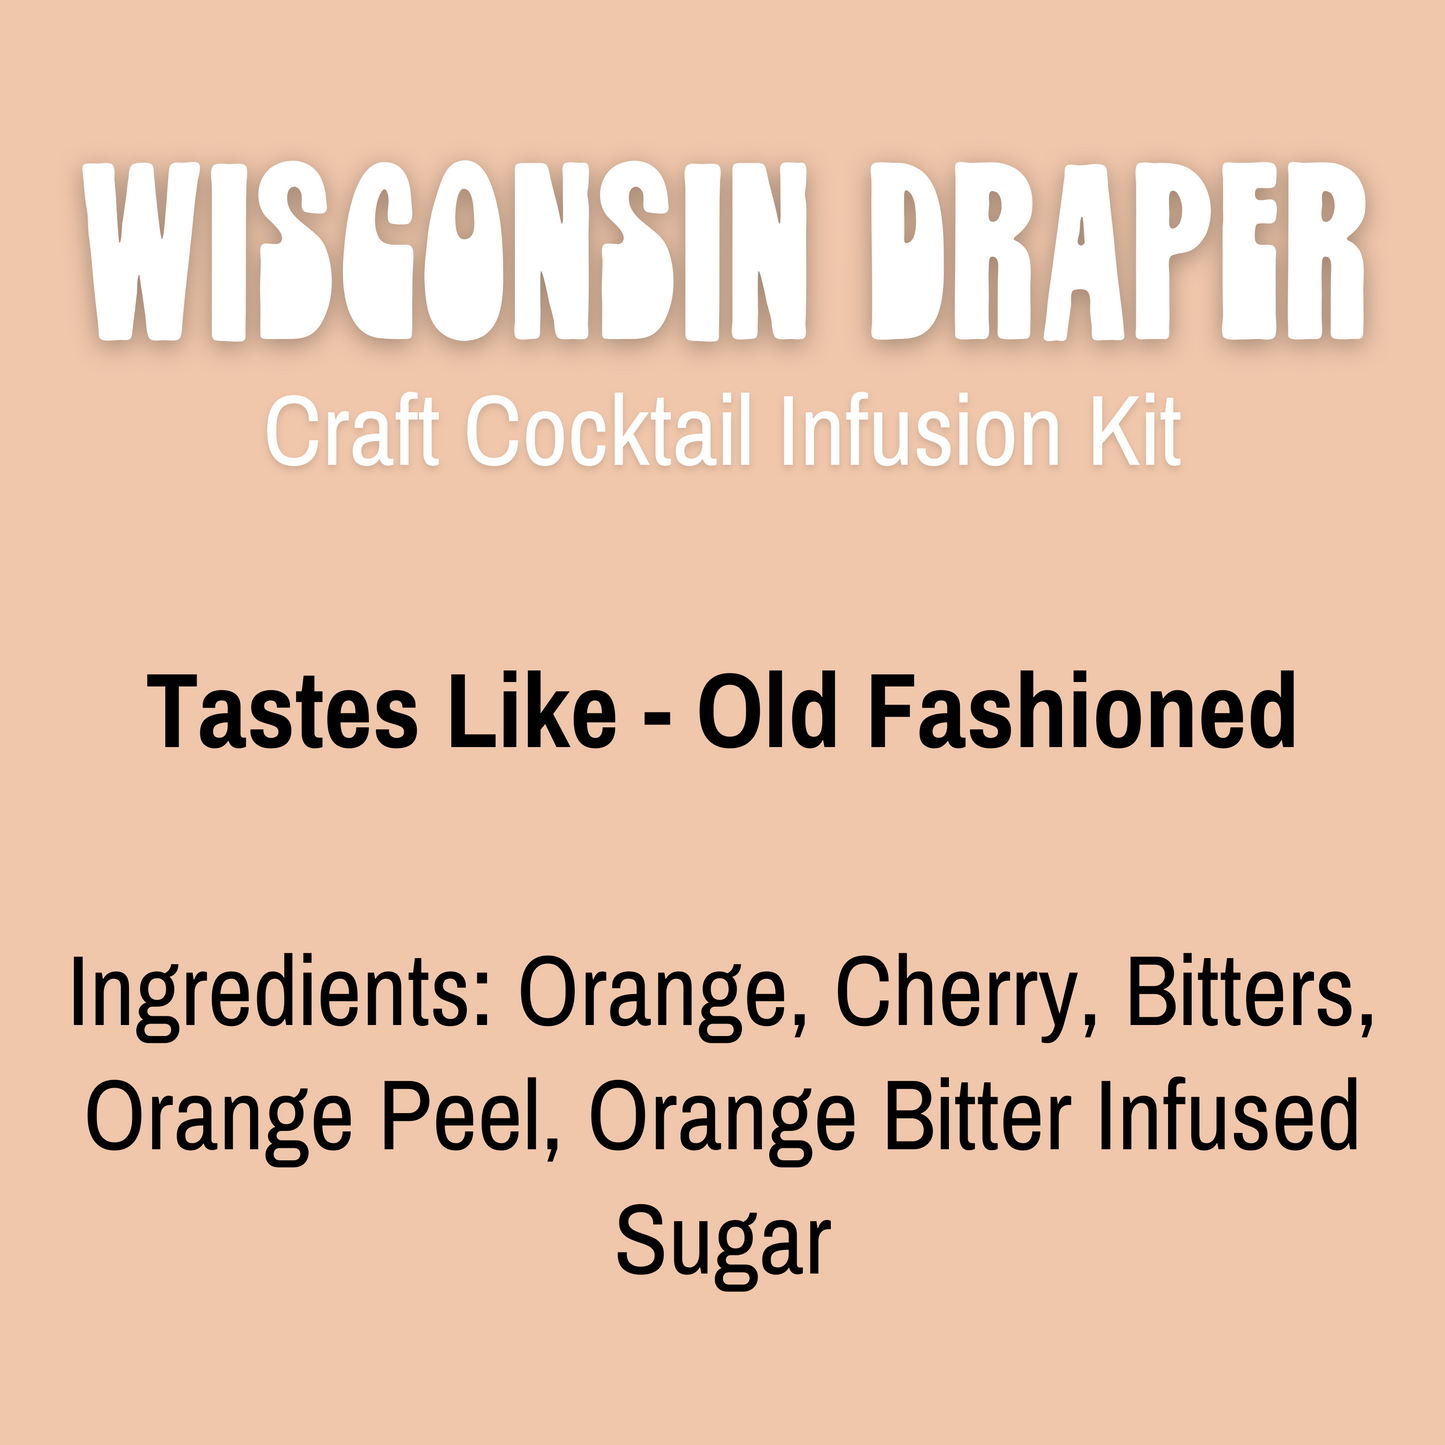 Load image into Gallery viewer, Wisconsin Draper Craft Cocktail Infusion Kit
